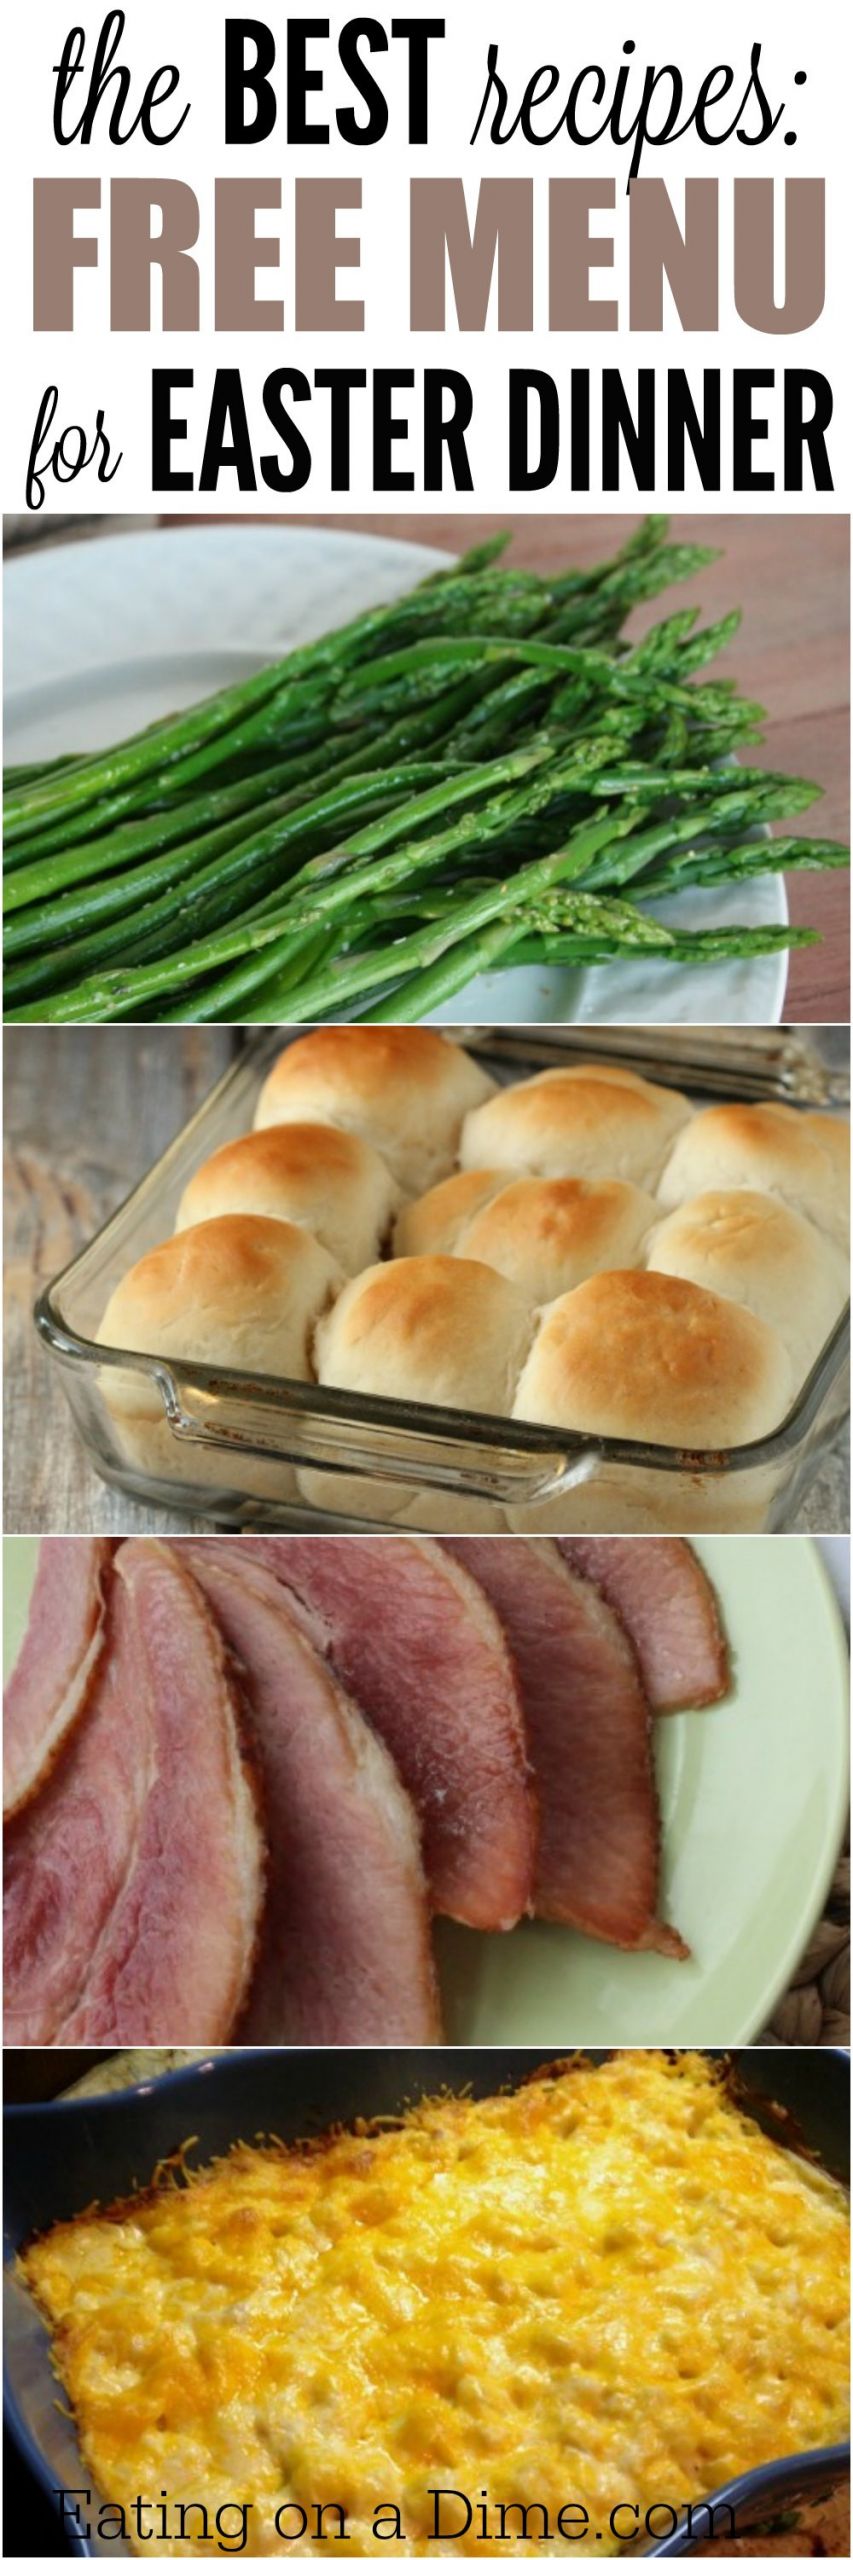 Easy Easter Dinner Menu
 Easter Menu Ideas and Recipes The Best Easter Dinner recipes